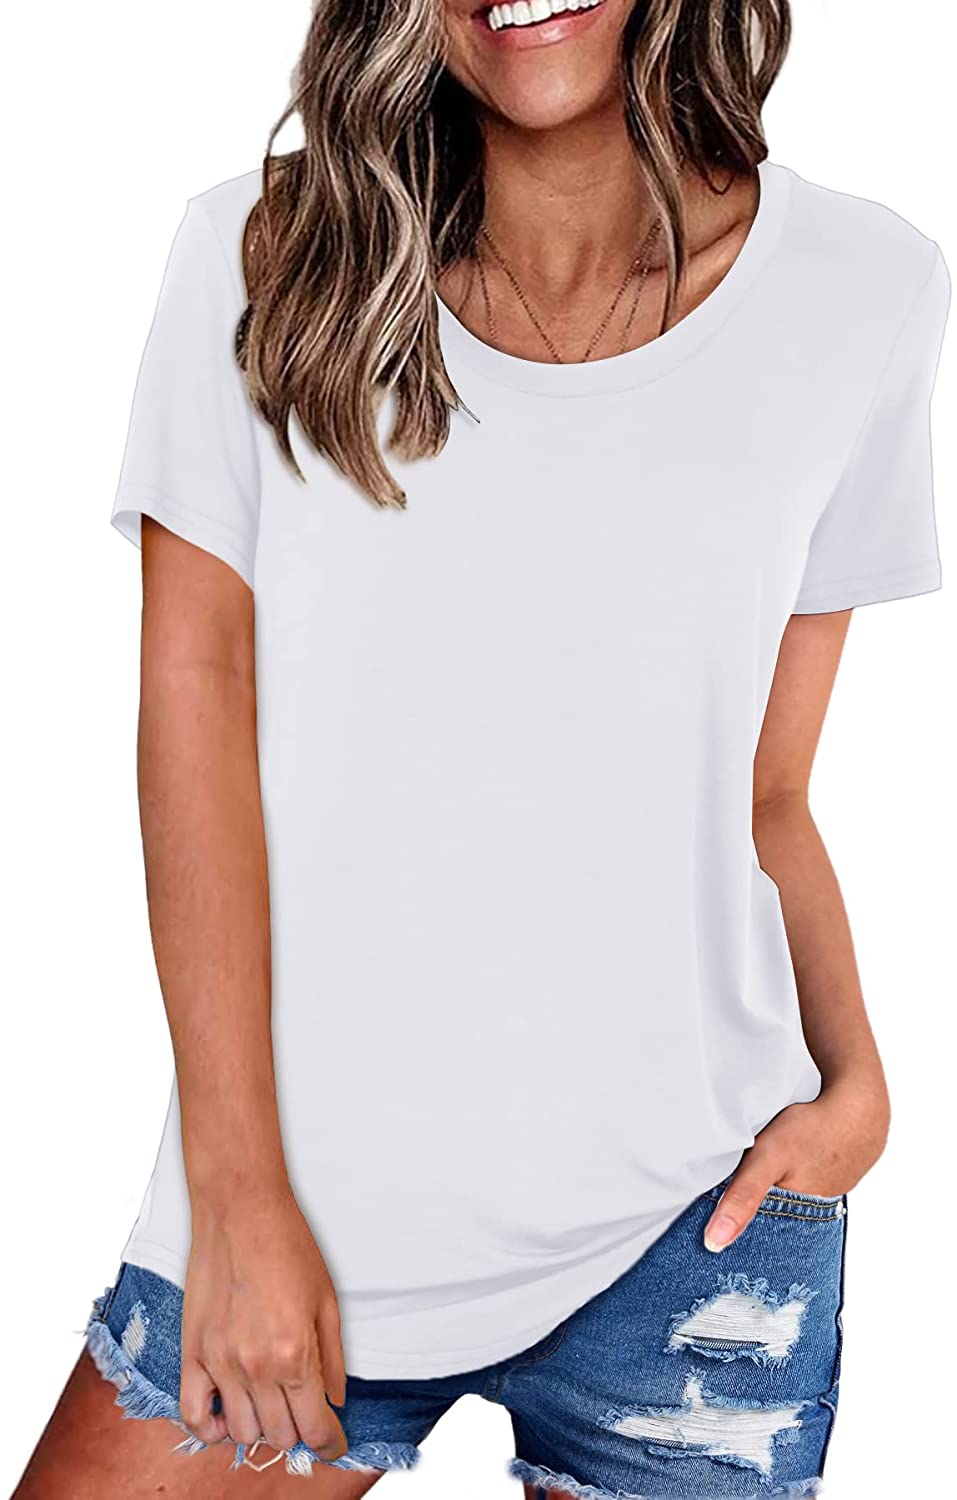 Amoretu Womens Scoop Neck Short Sleeve Tee Tops Cotton T-Shirts for Summer